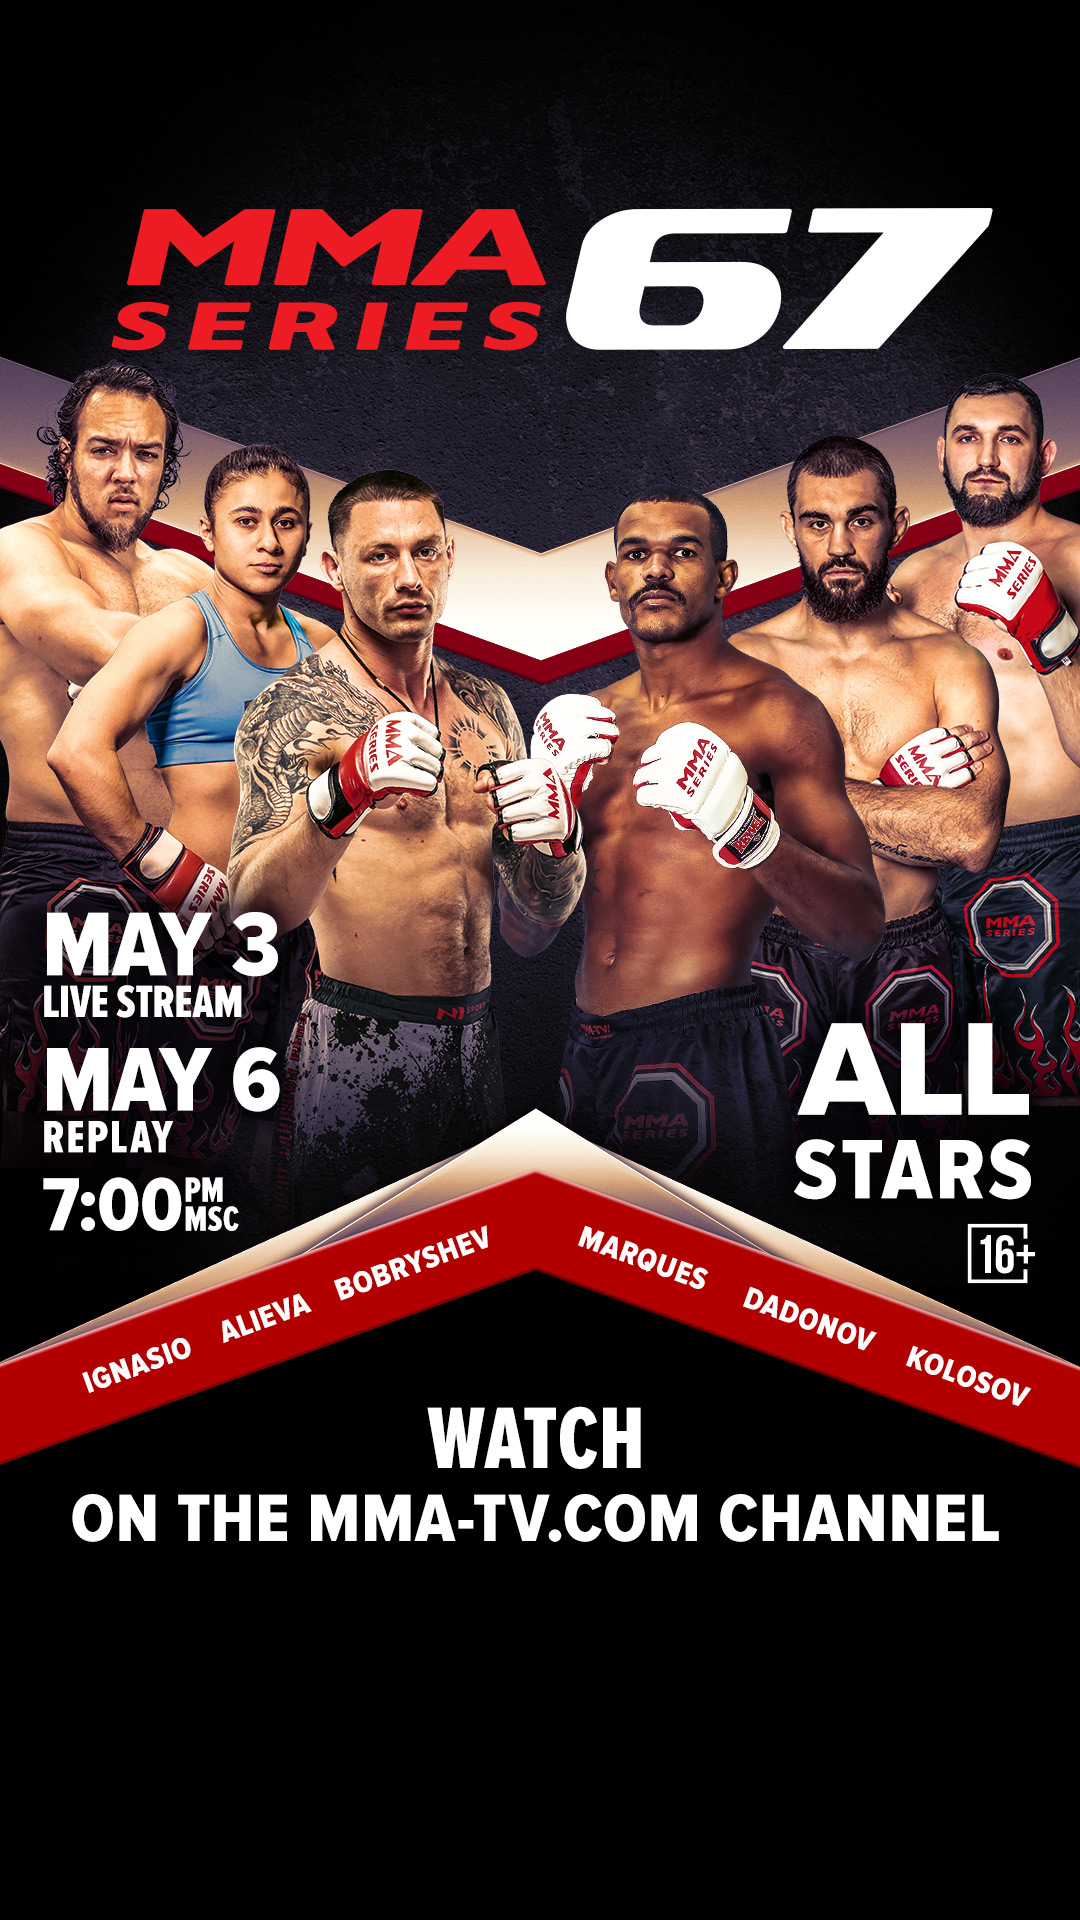 MMA Series — 67 All stars MMA Series official website